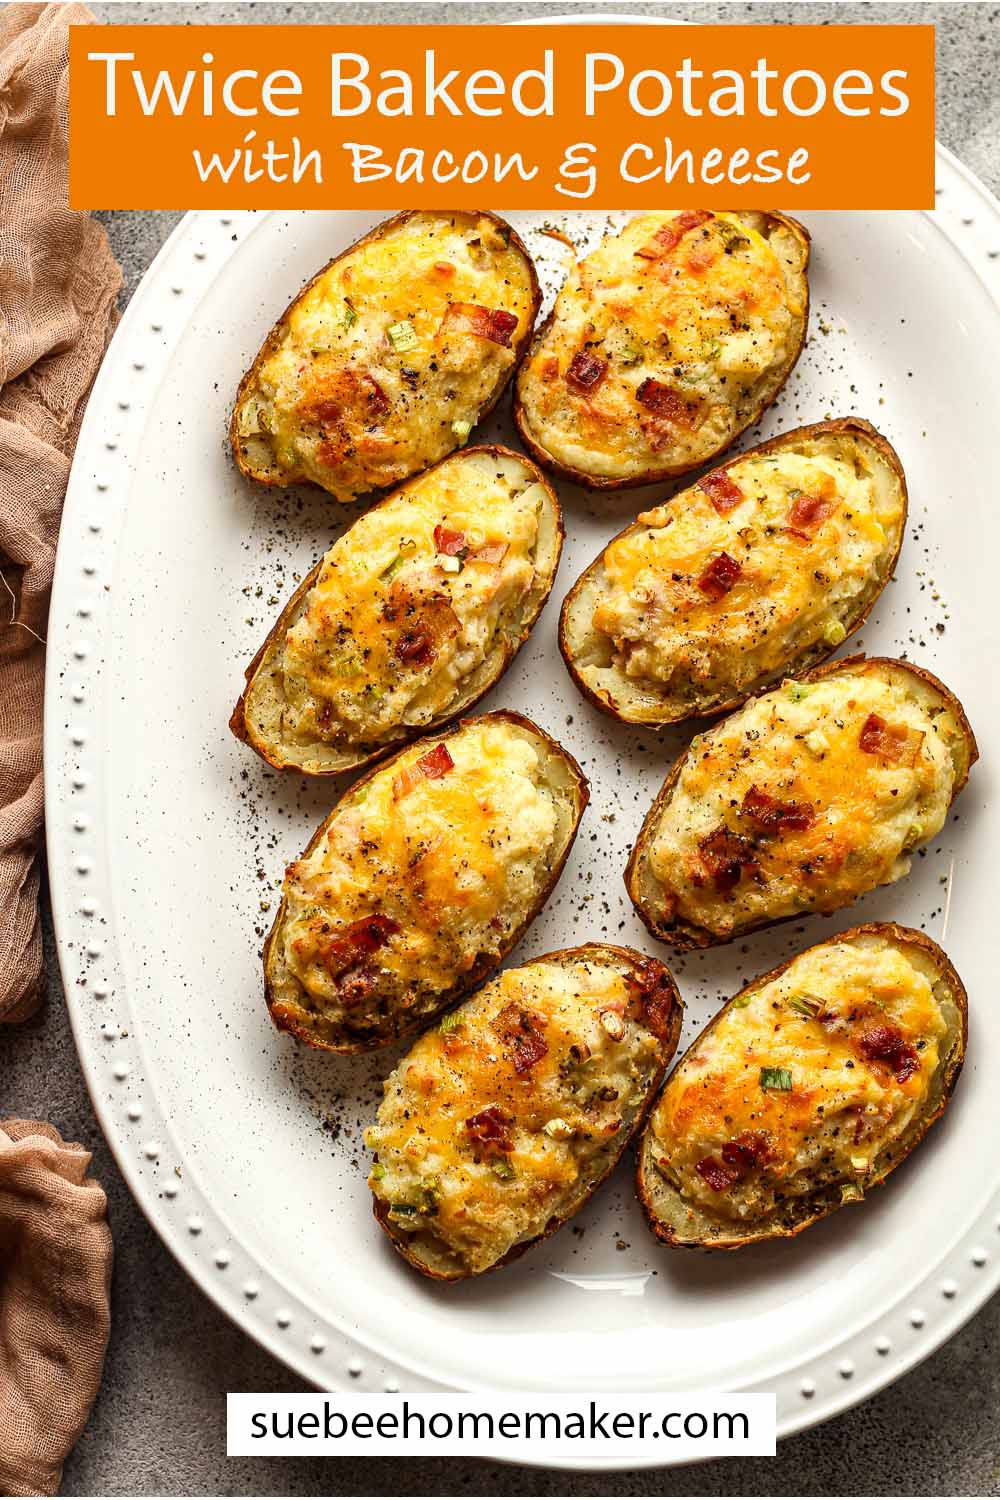 A large platter of twice baked potatoes with bacon and cheese.